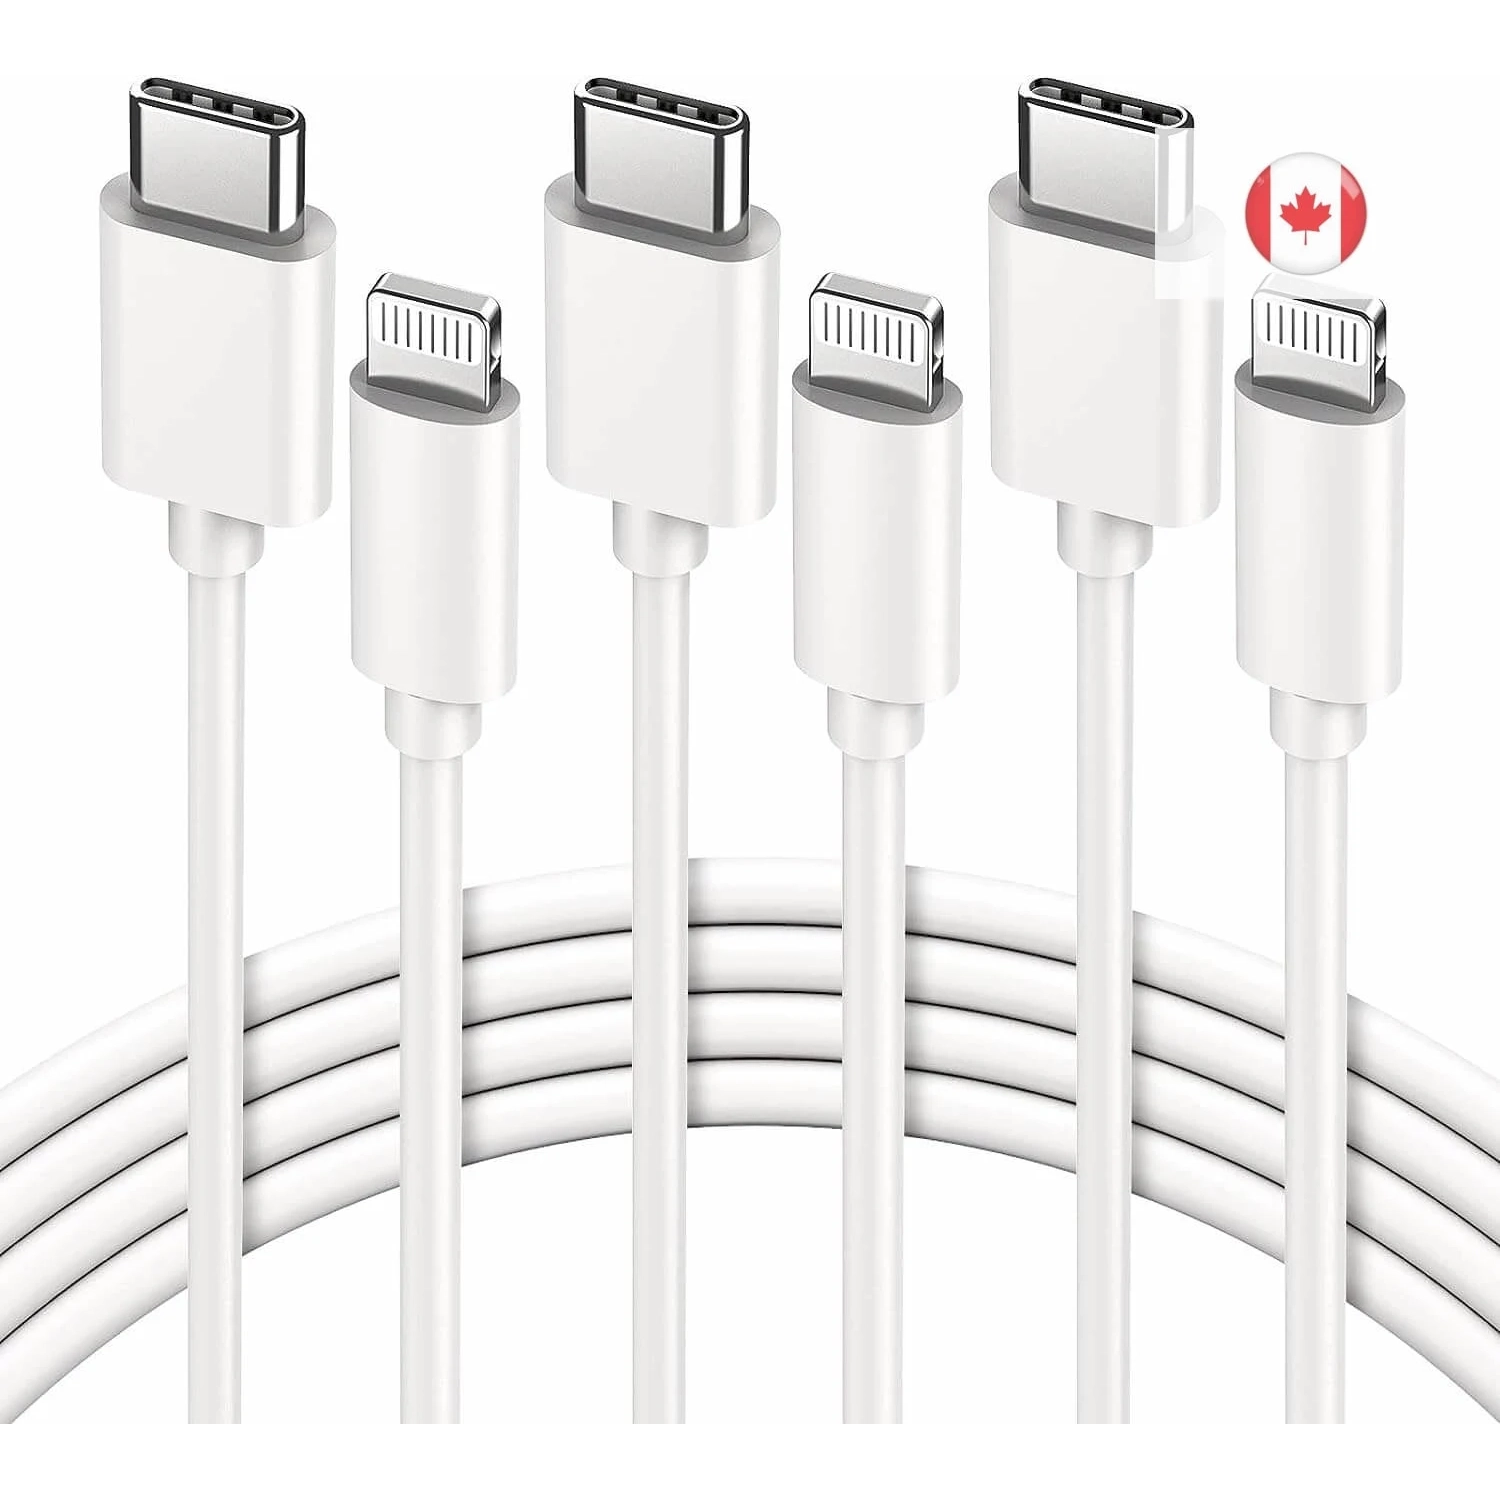 3 X Packs iPhone 12 13 Fast Charger Cable USB C to Lightning Charging Cord - Type C Port Support Charging Compatible with iPhone 13 12 Mini Pro Max 11 S